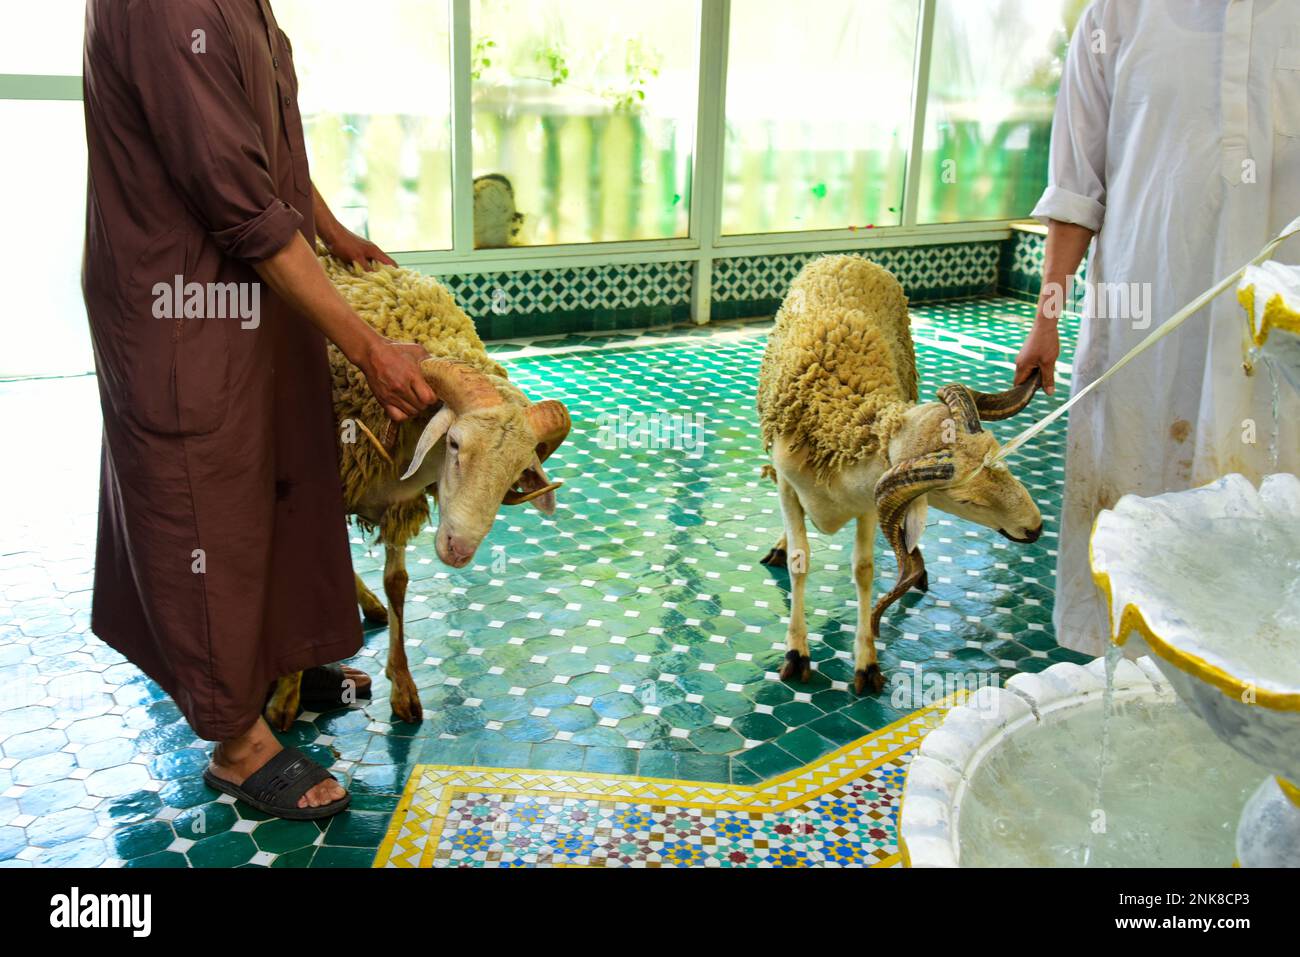 Eid al-Adha in Morocco. Men catch the Eid sheep in preparation for slaughtering it Stock Photo